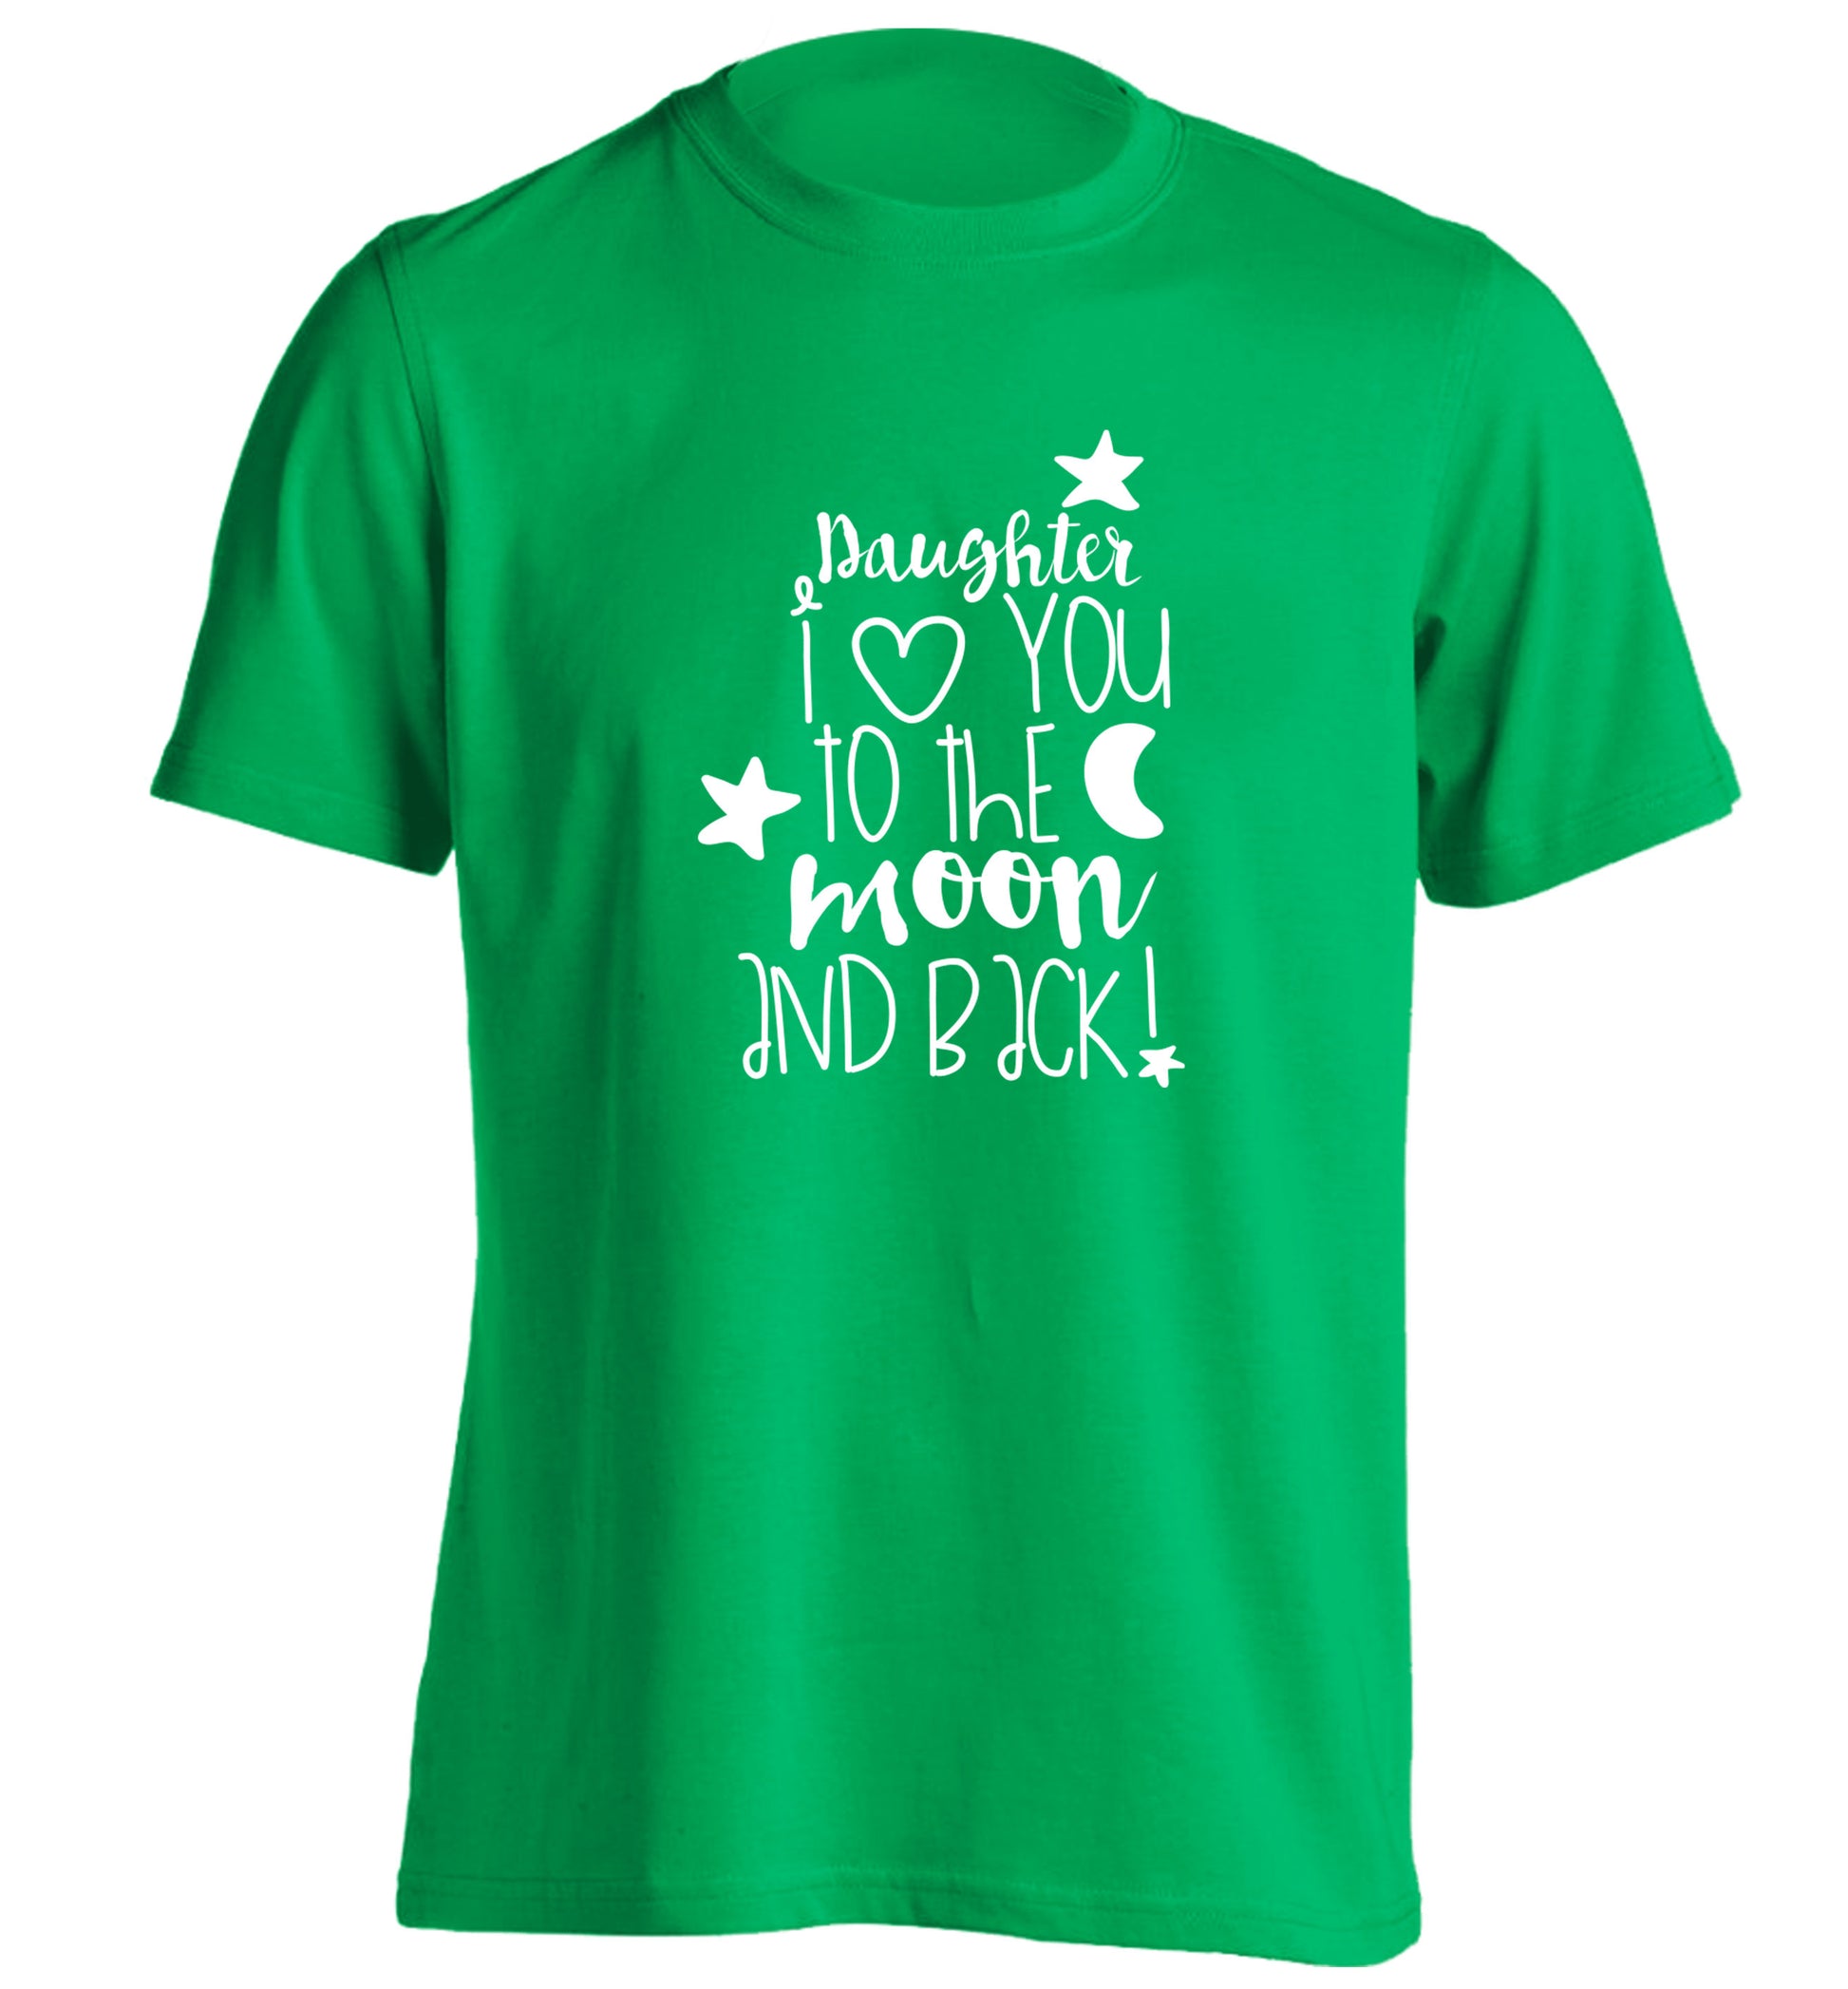 Daughter I love you to the moon and back adults unisex green Tshirt 2XL